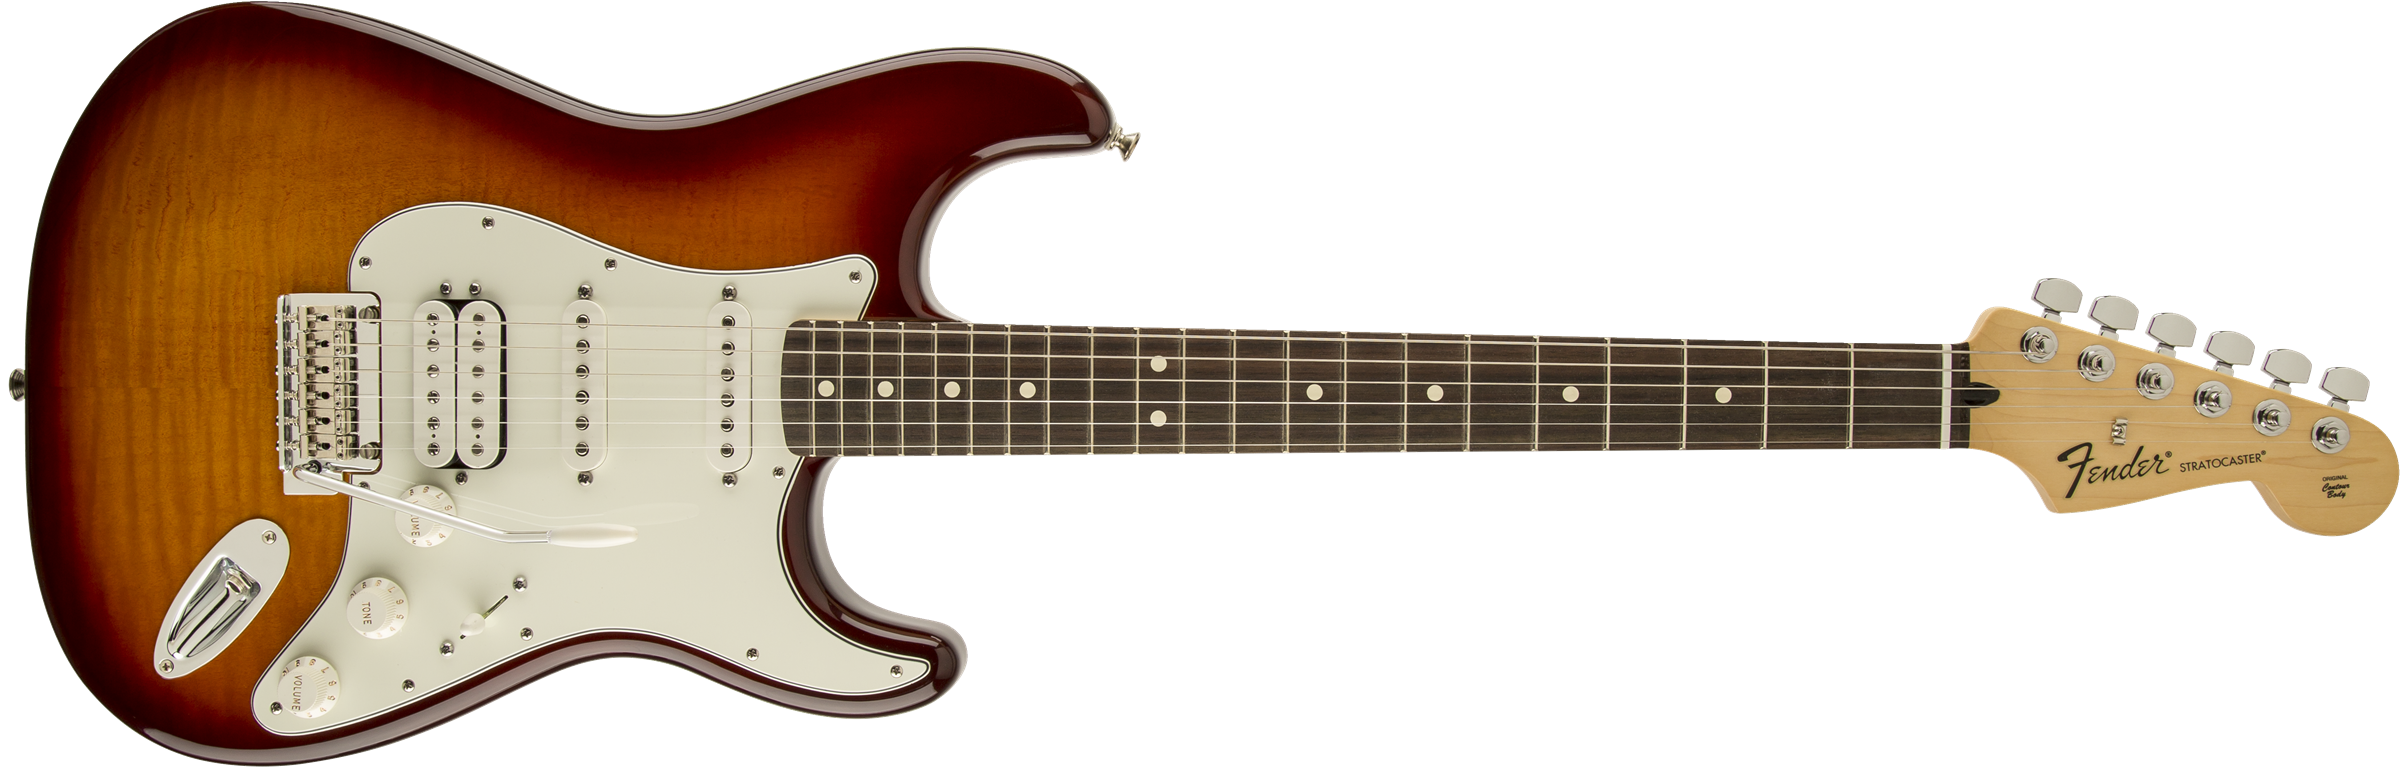 Deluxe Stratocaster® HSS Plus Top with iOS Connectivity, Rosewood Fingerboard, Tobacco Sunburst